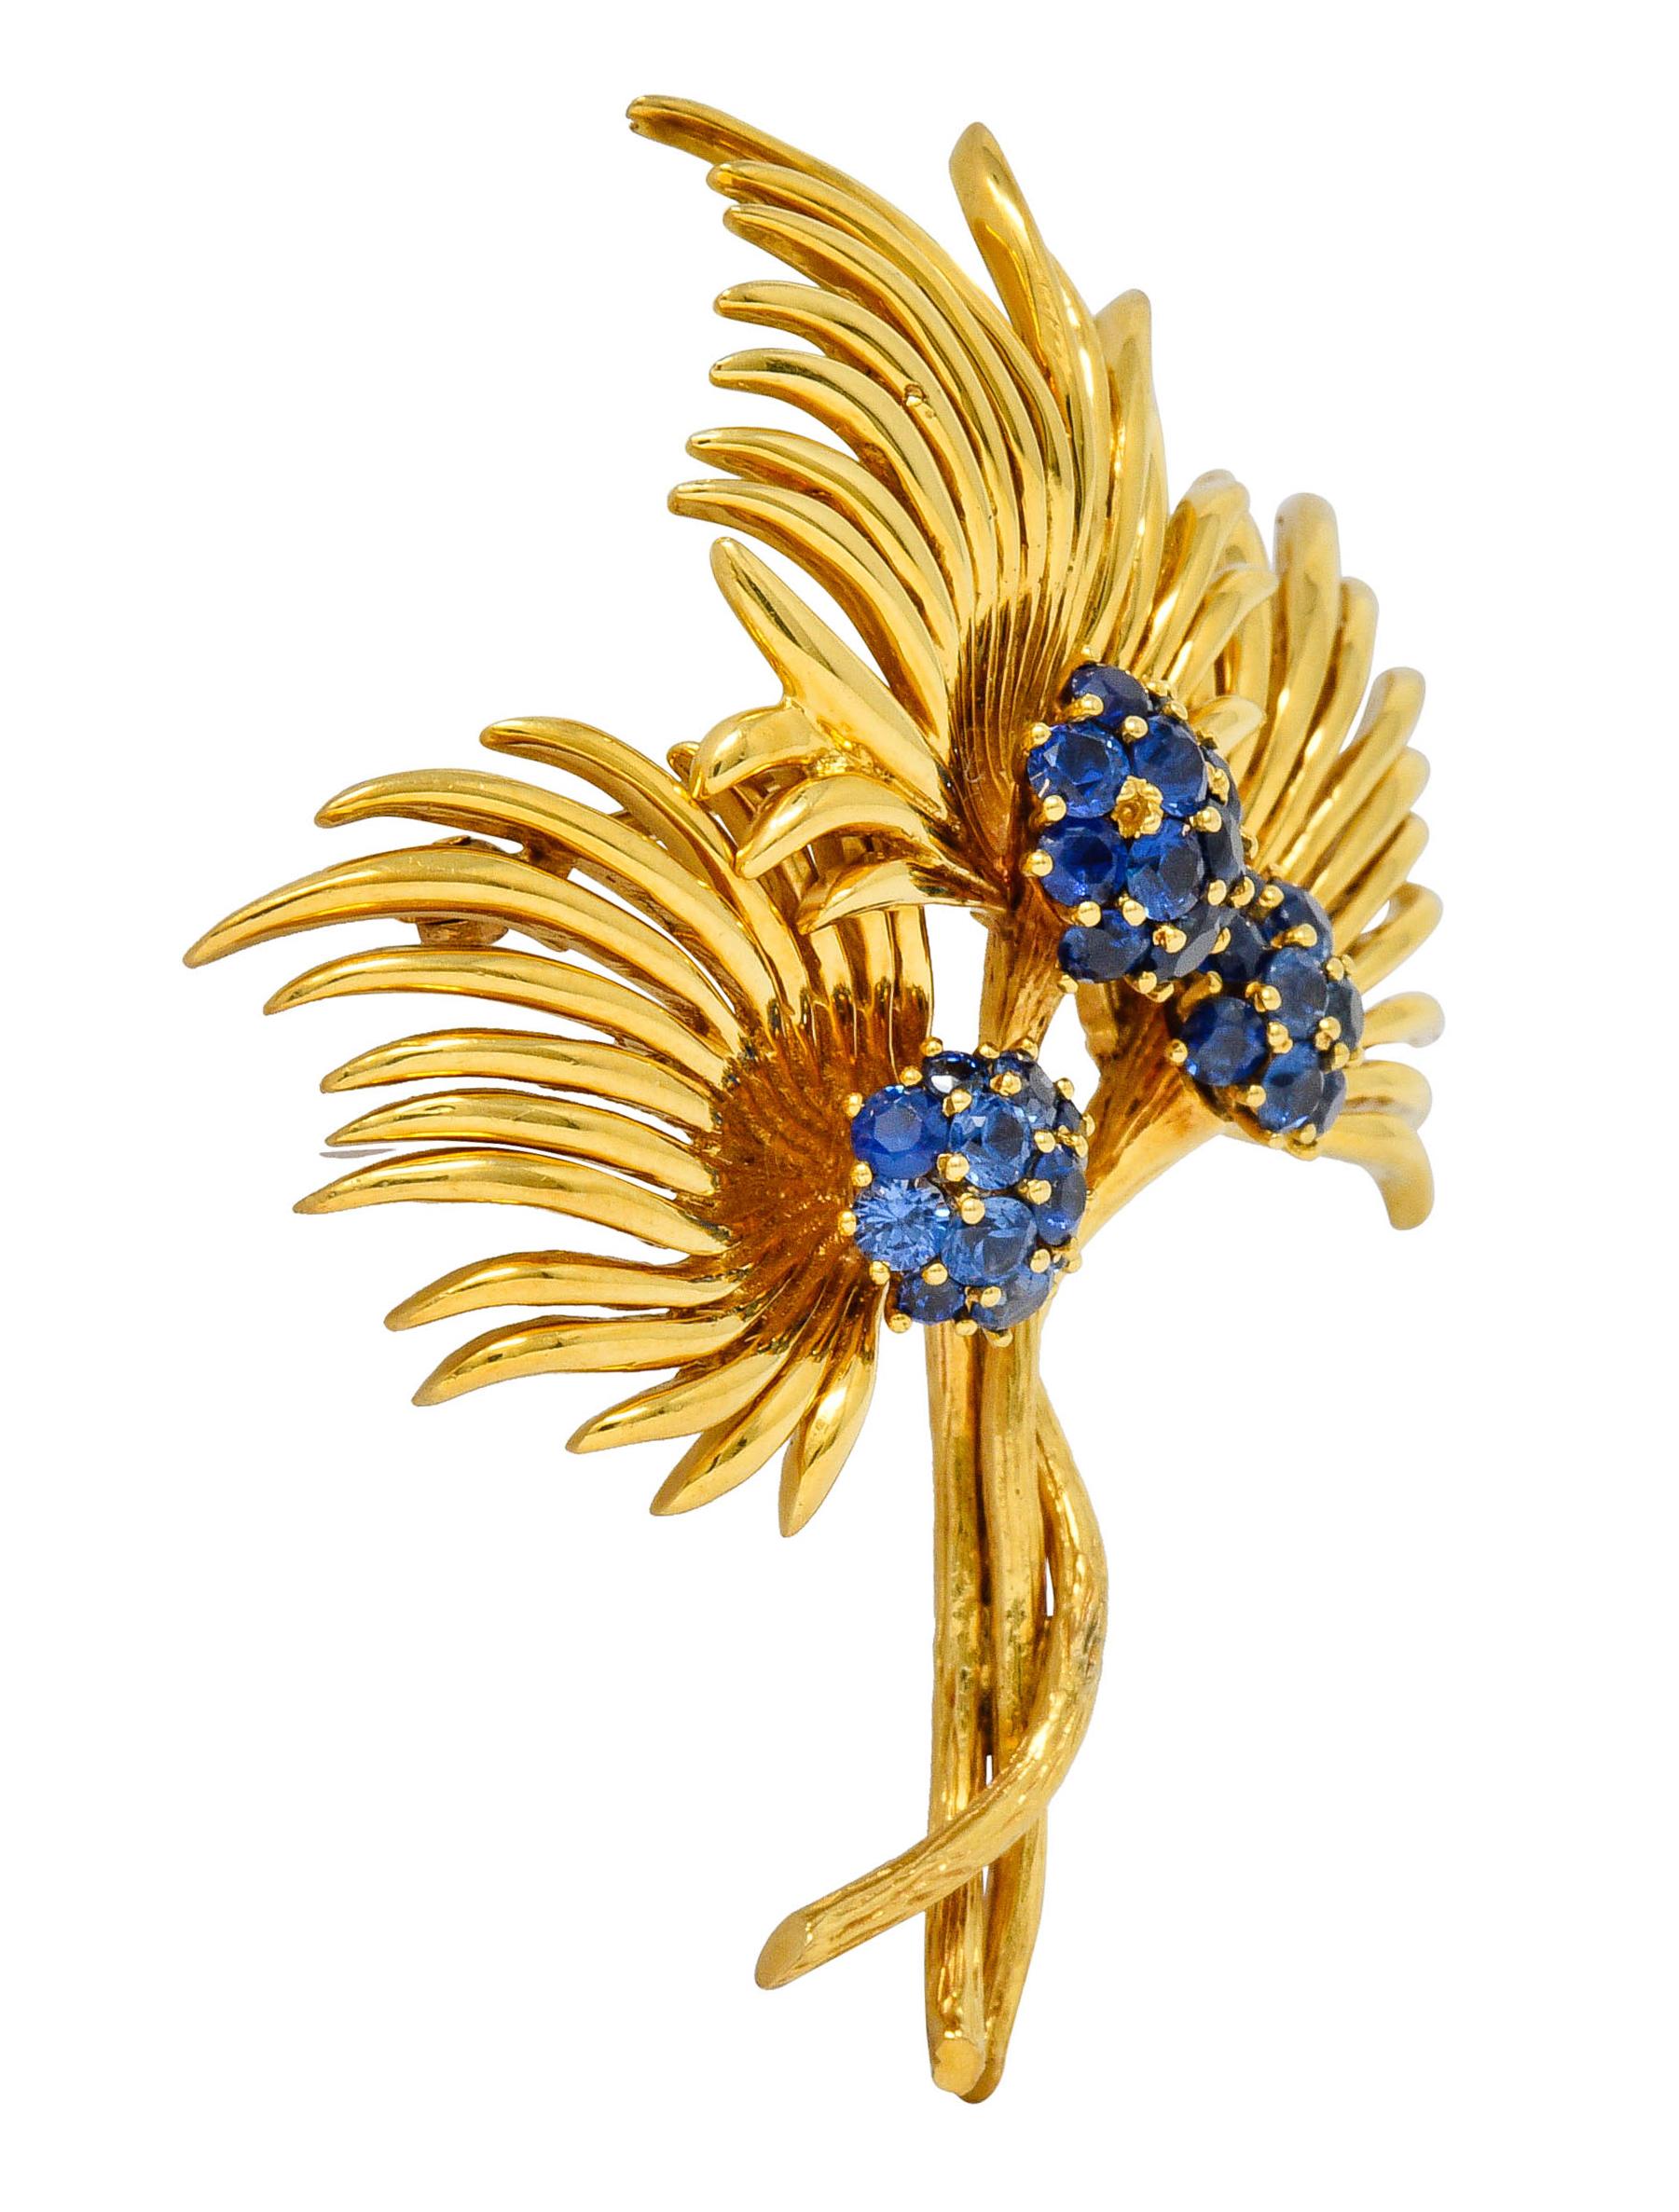 Brooch is designed as three stylized flowers comprised of polished gold tendrils and intertwined stems

Each flower centers a cluster of bright blue to violetish-blue round cut sapphires

Weighing in total approximately 3.56 carats

Completed by pin